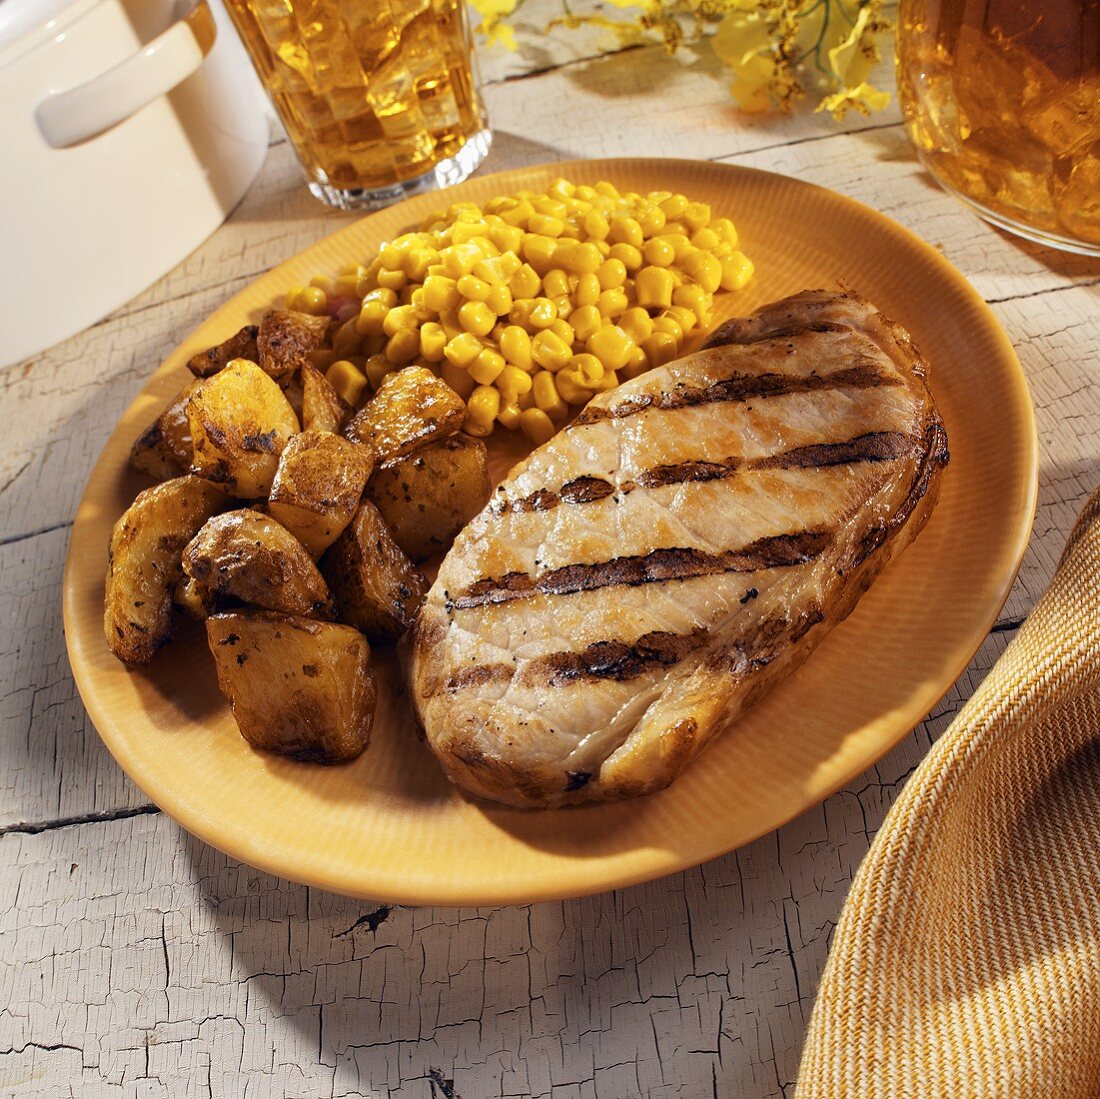 Grilled Pork Loin Chop with Roasted Potatoes and Corn